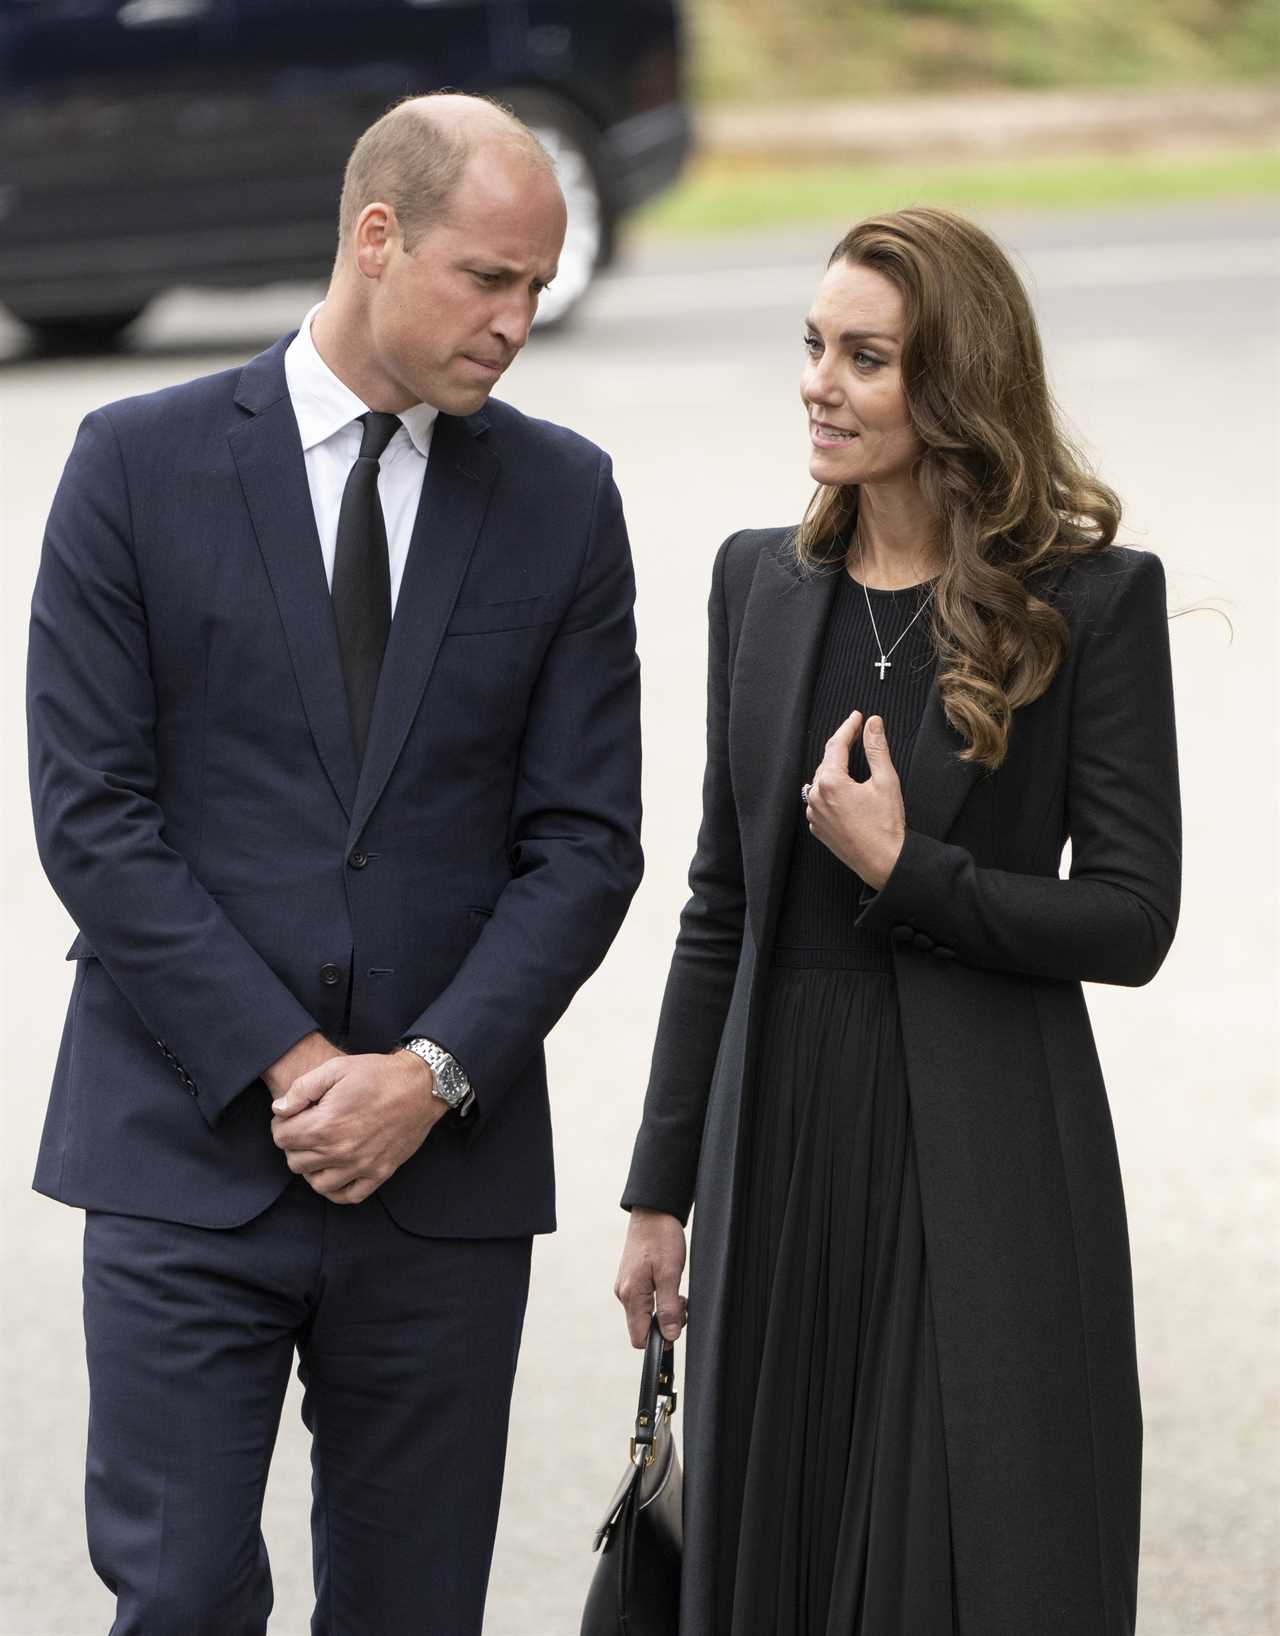 Prince William battling ‘inner tension’ and shows he feels ‘powerless’ over Queen’s death, body language pro claims